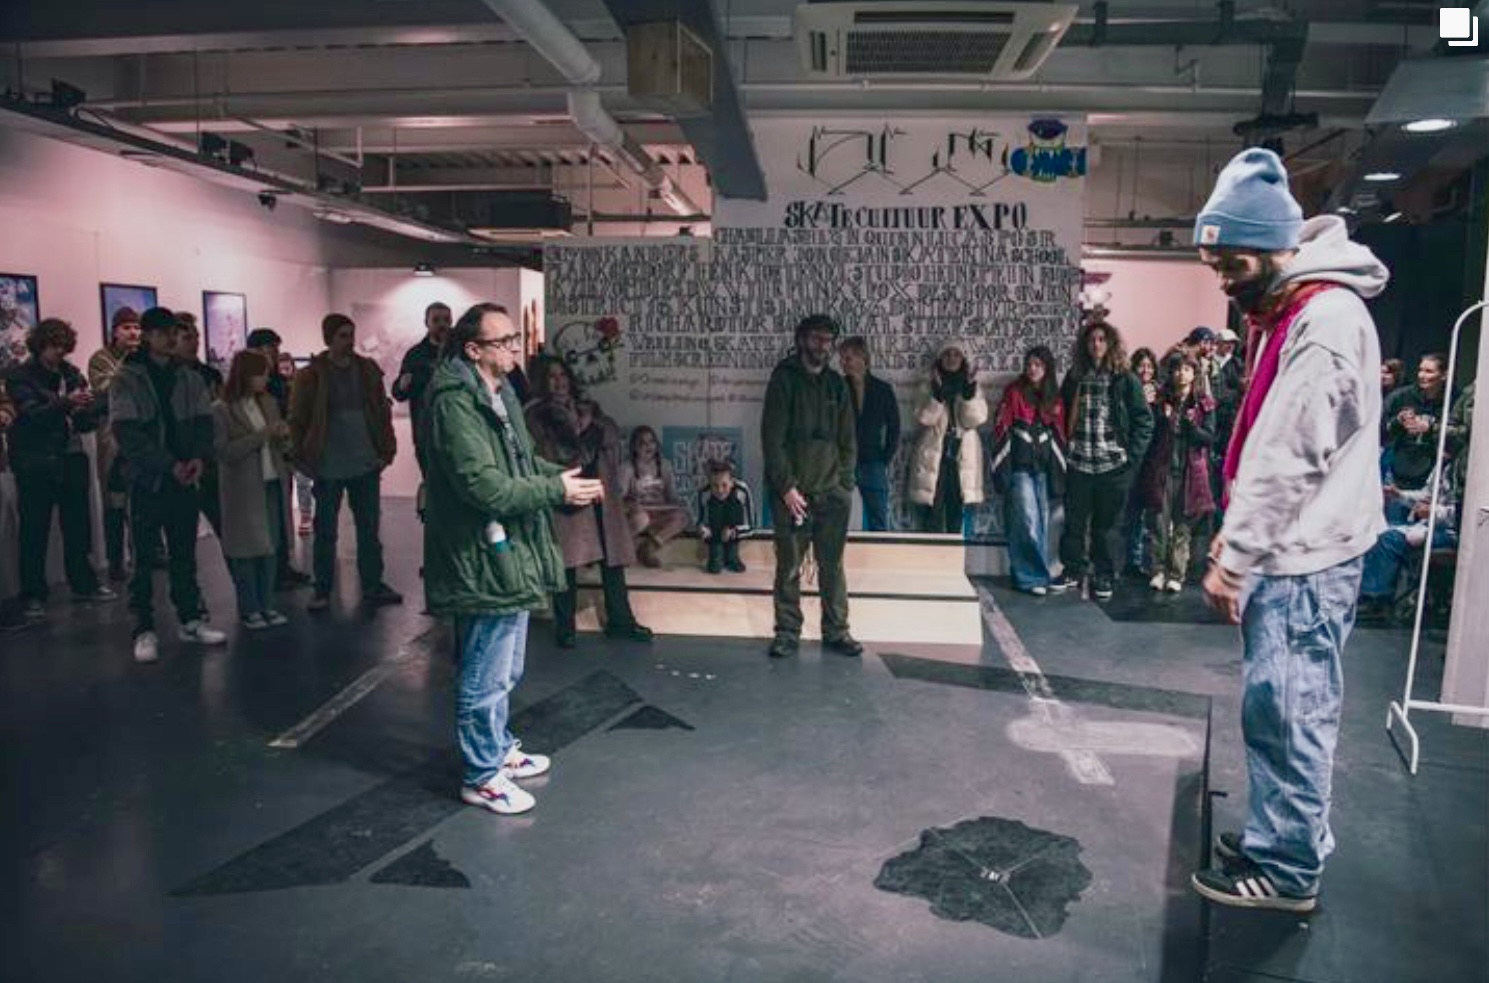 Step into the apocalyptic realm of the Zombie Skate Culture Expo